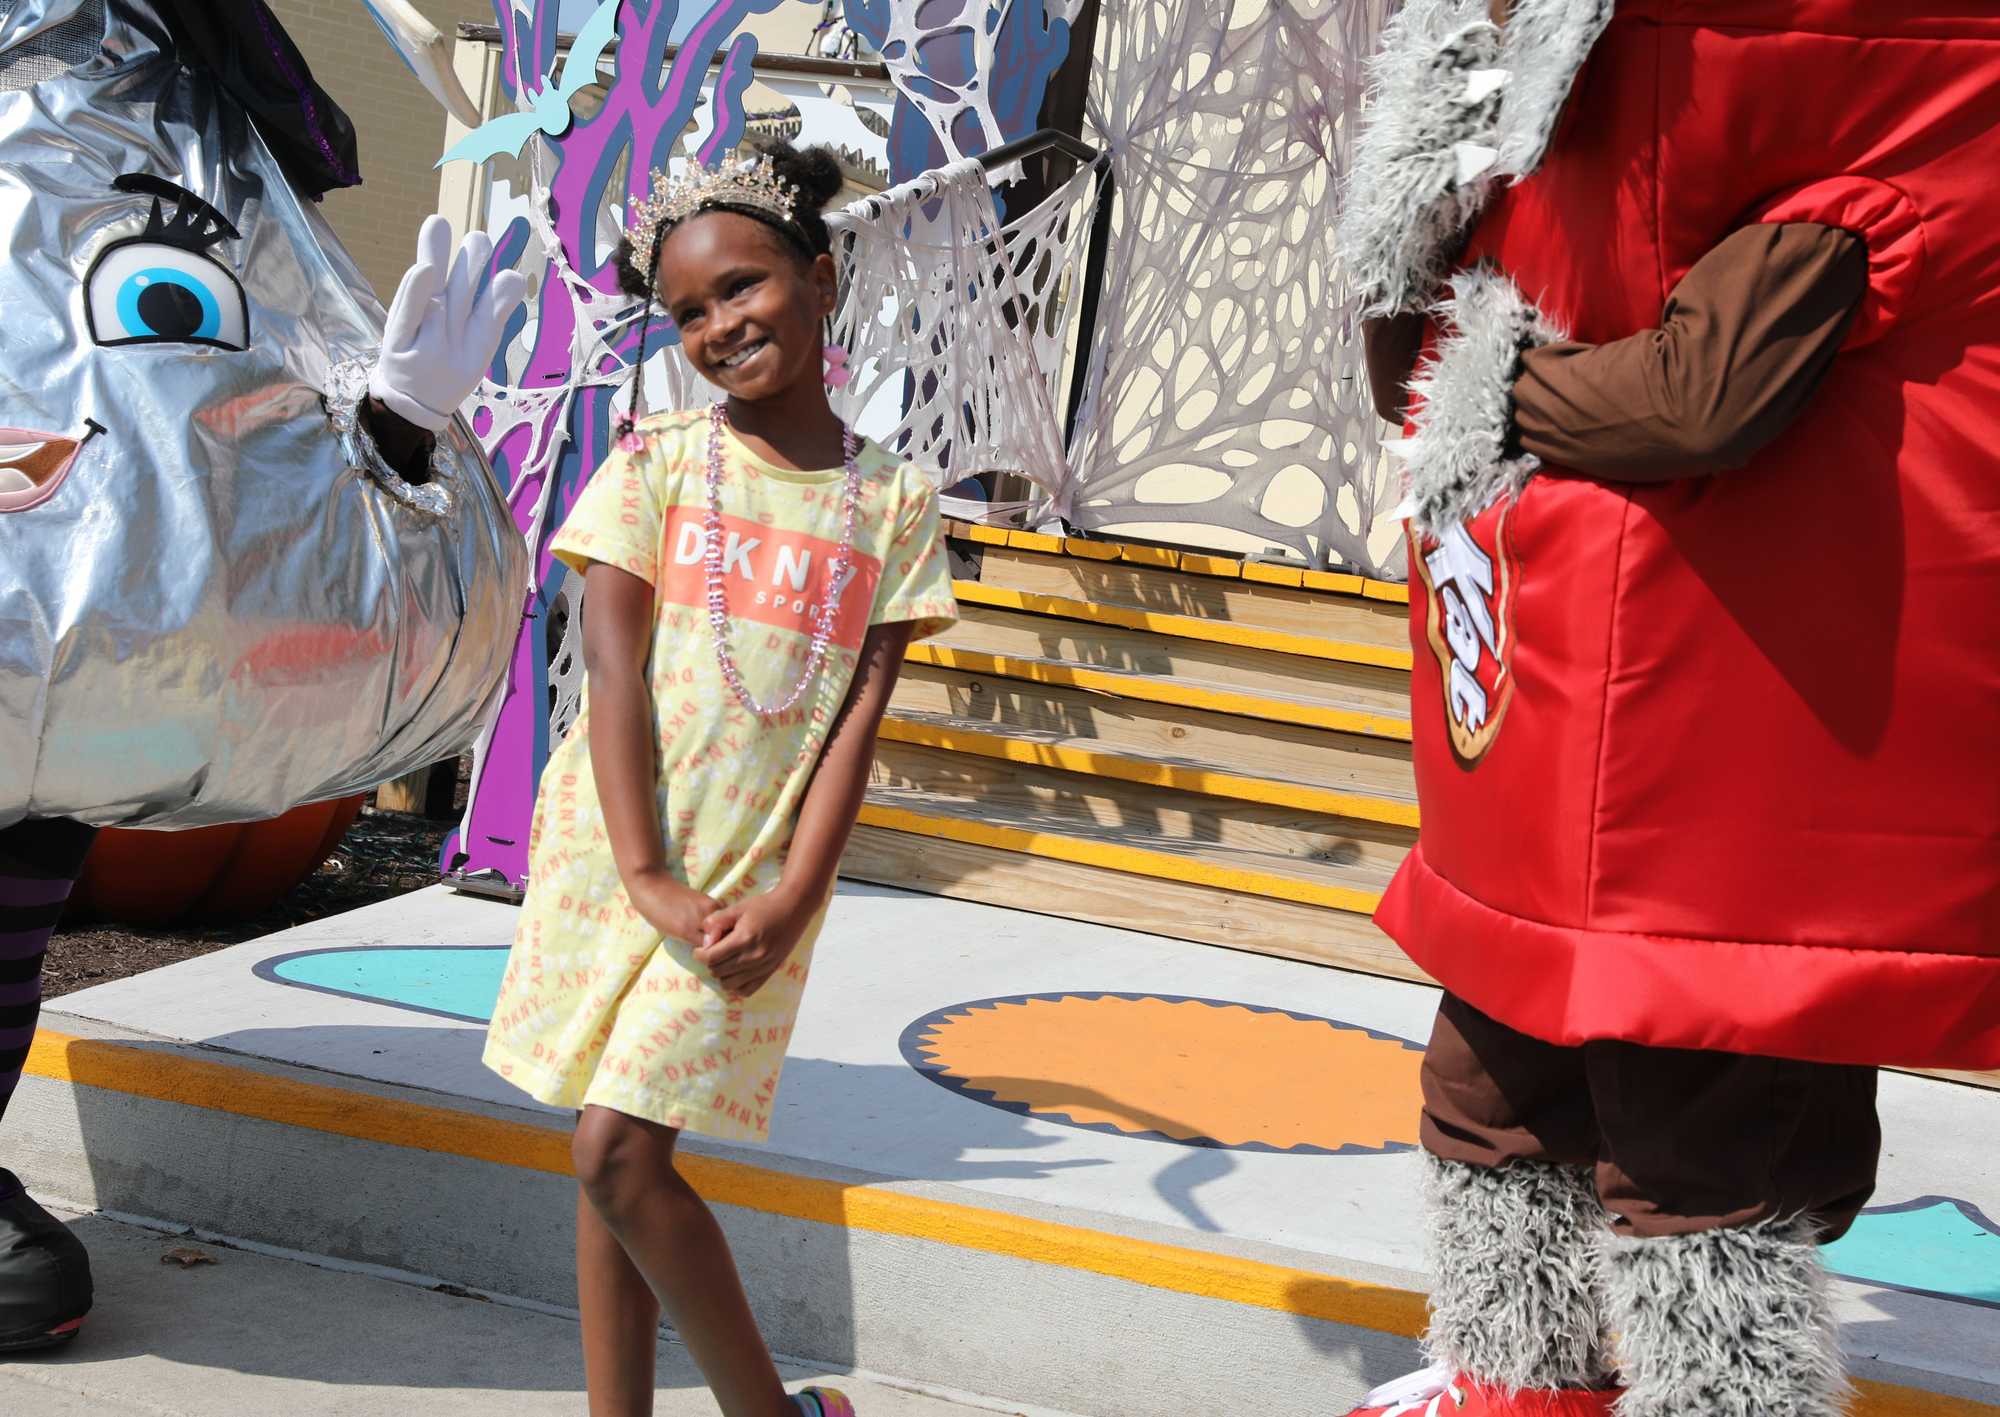 Ja’el Johnson, 7, of Charleston, W.Va., got her picture taken with park characters on her first trip to Hersheypark in Pennsylvania for her birthday. 